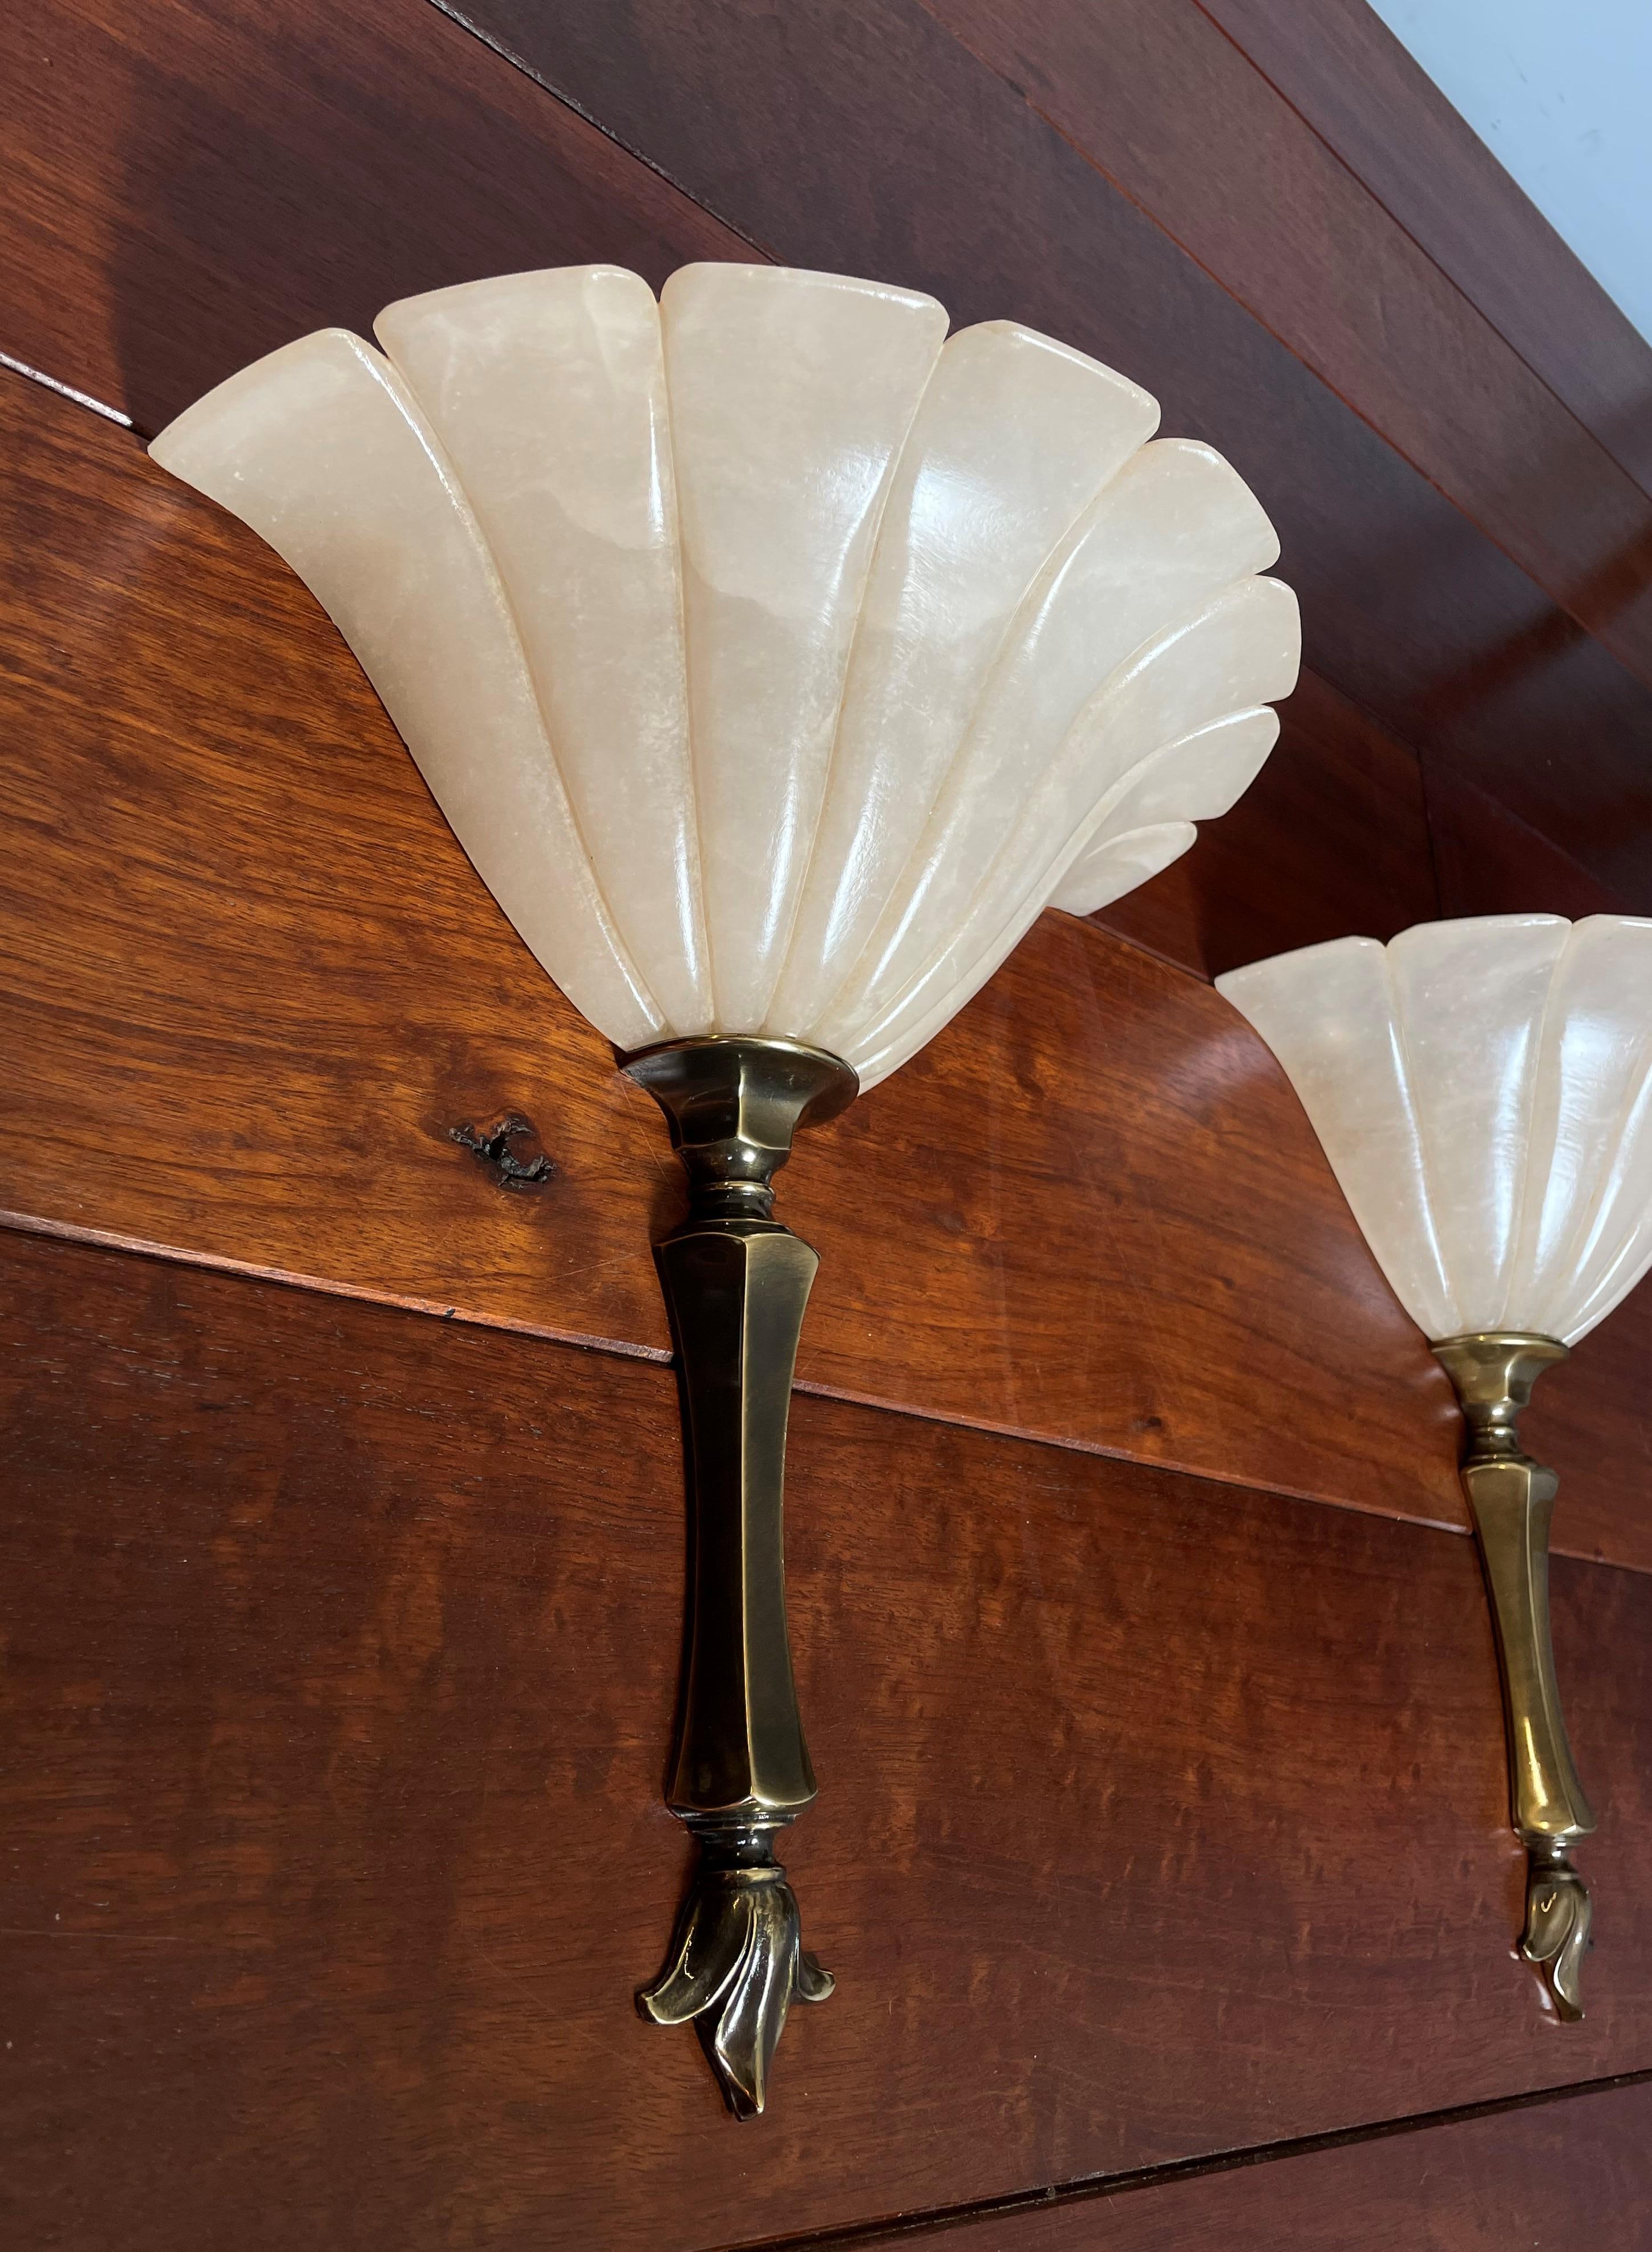 Excellent condition alabaster sconces with stunning patterns in their alabaster shades.

This finest and very rare French pair of alabaster sconces is both beautiful in shape and practical in size. Hand-crafted and with a brass stem and lily